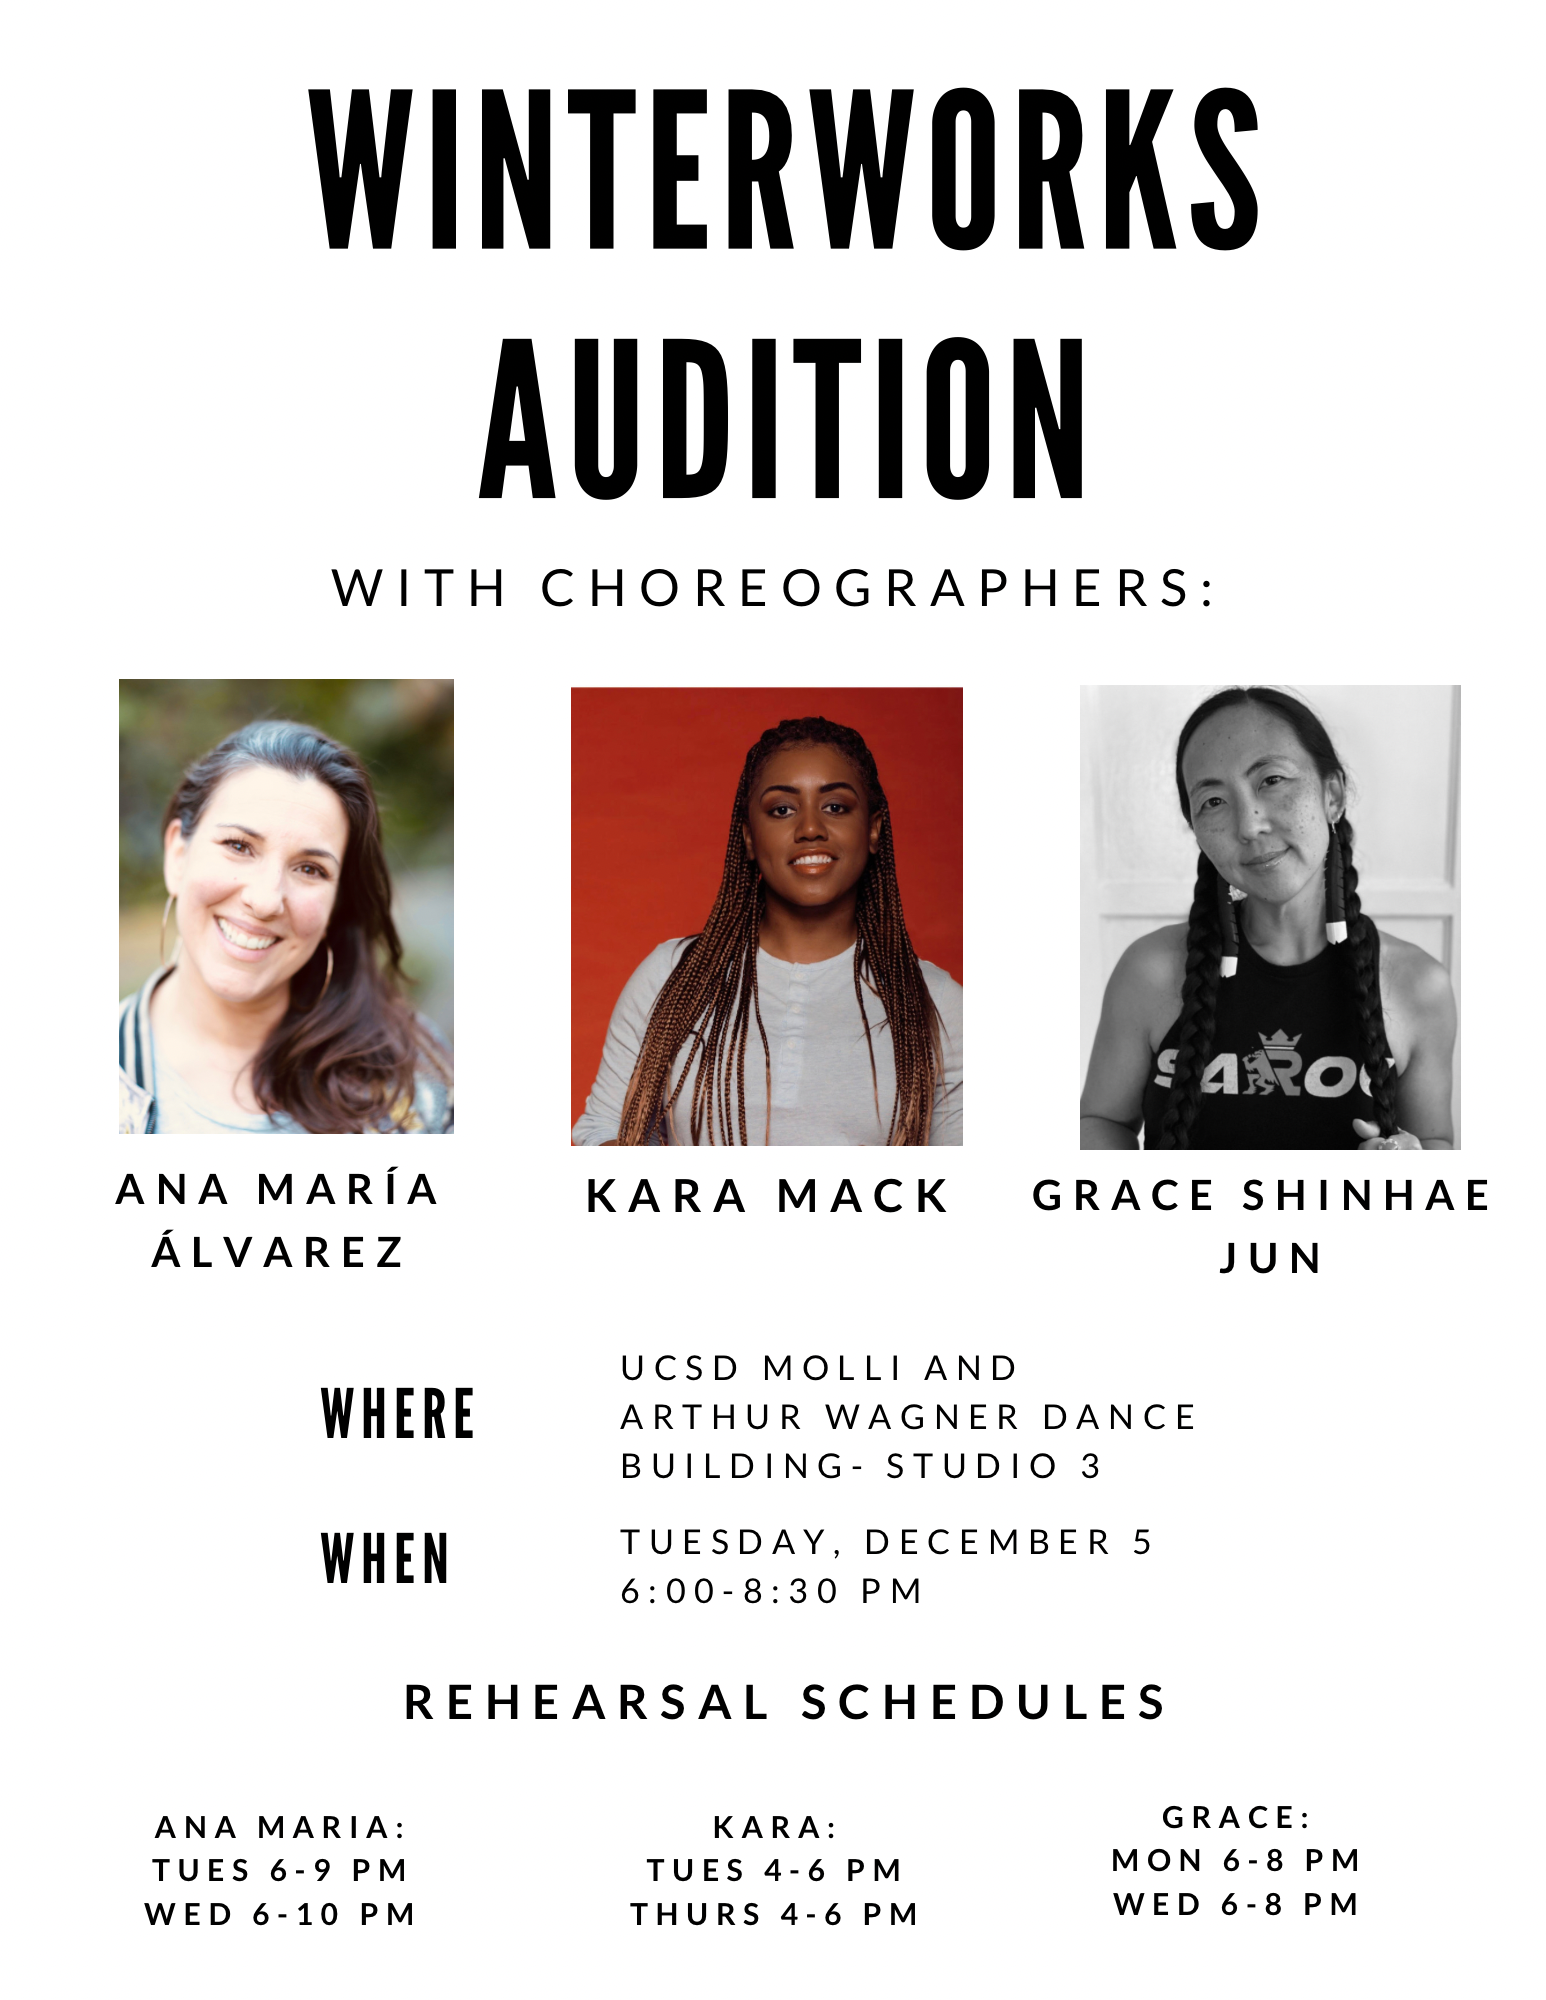 miniaturized flier for the december 5 winterworks auditions at tdmv